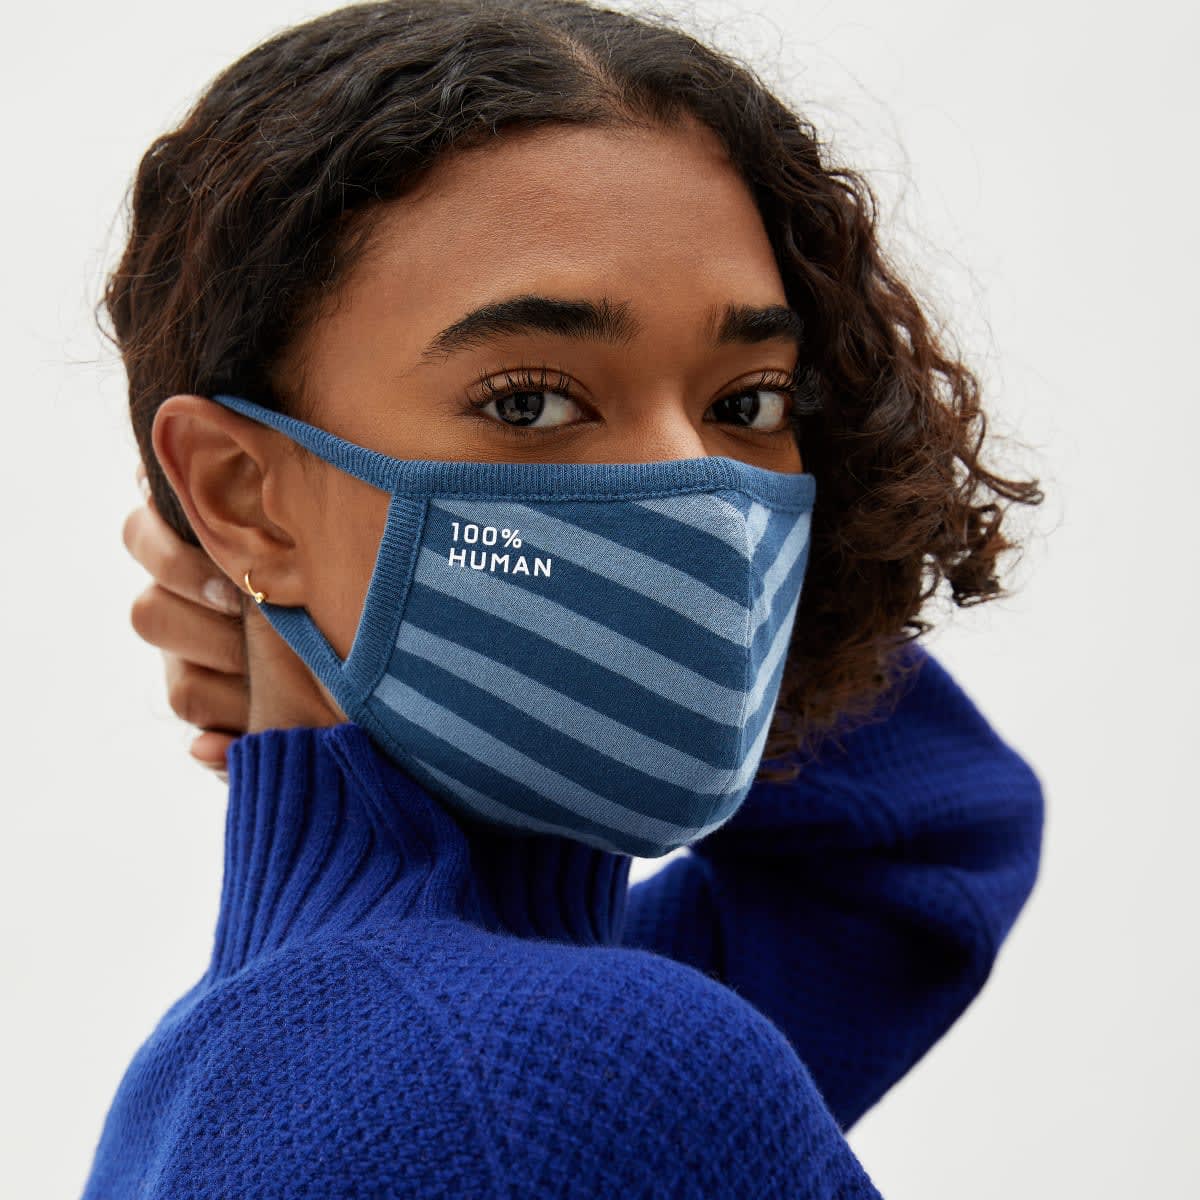 The £250 designer face mask: brash and obnoxious, or the latest